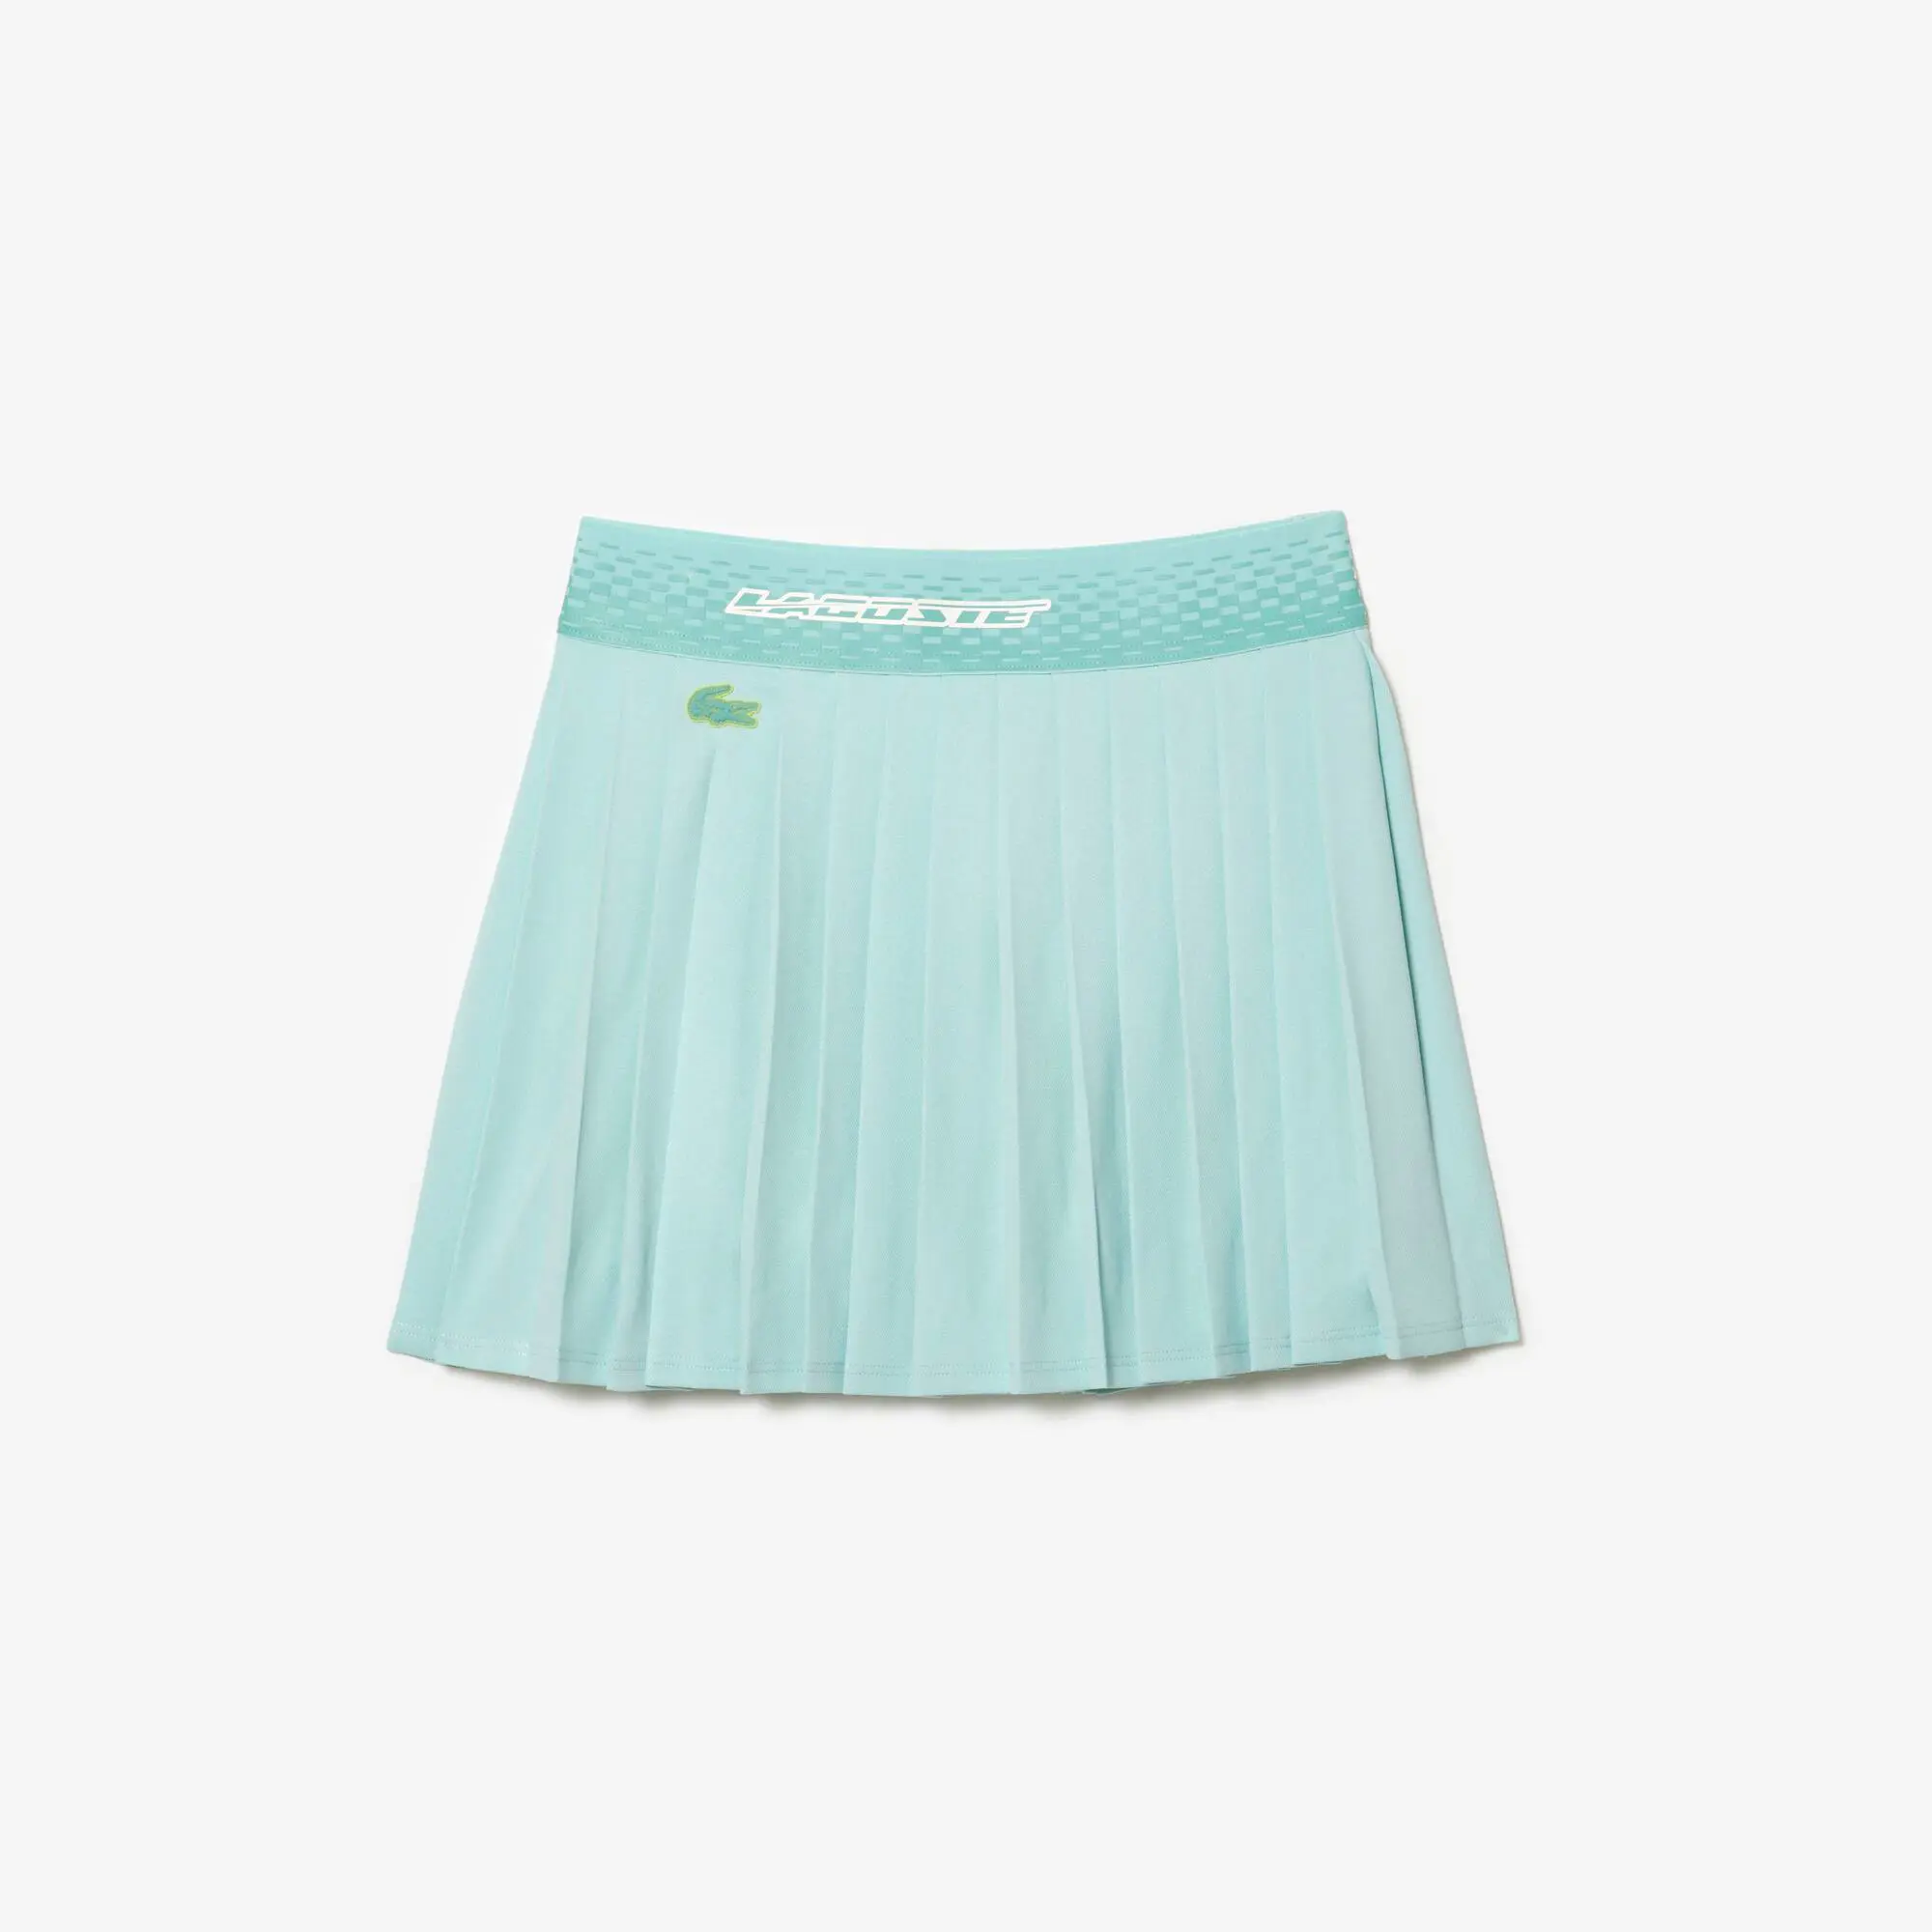 Lacoste Women’s Lacoste Tennis Pleated Skirts with Built-in Shorts. 2